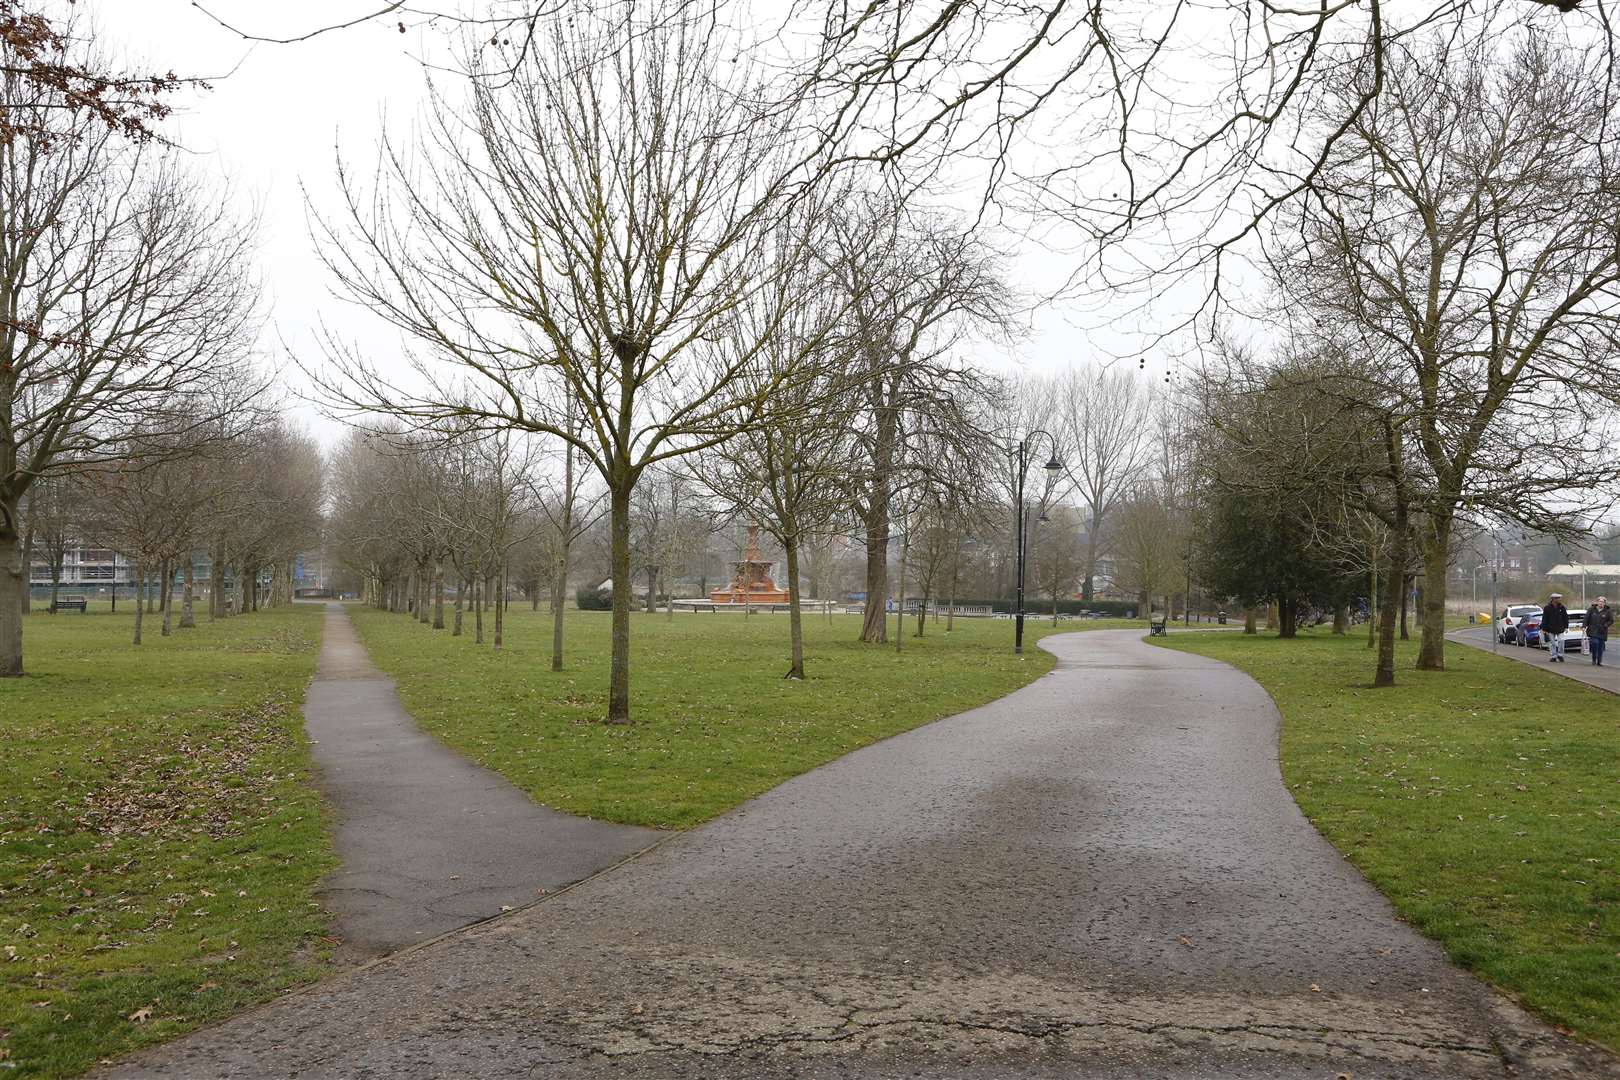 Victoria Park was included in the dispersal order